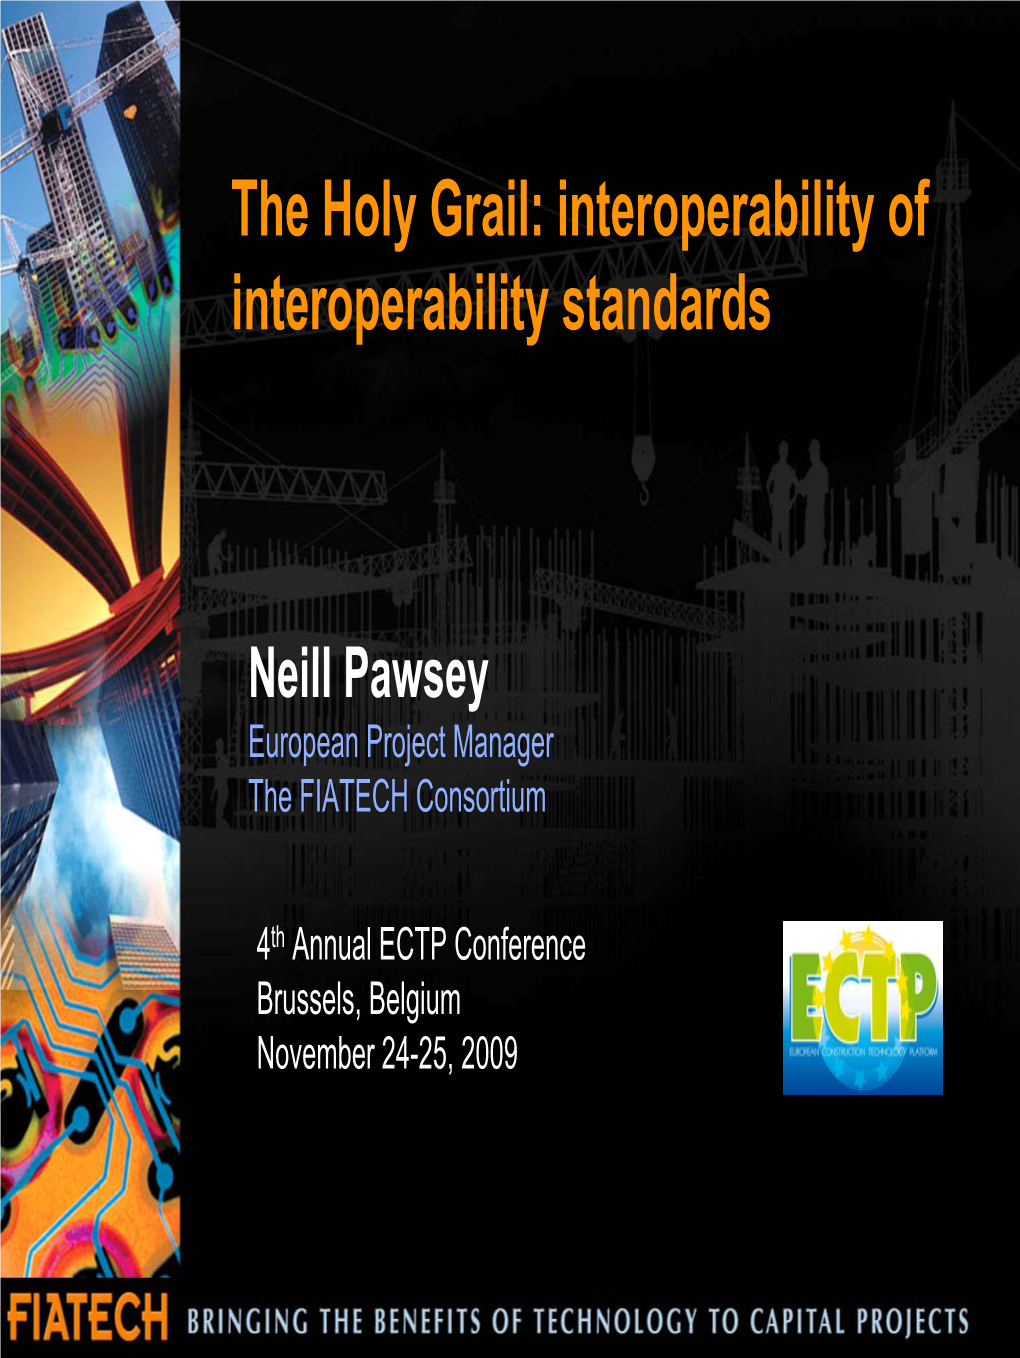 The Holy Grail: Interoperability of Interoperability Standards